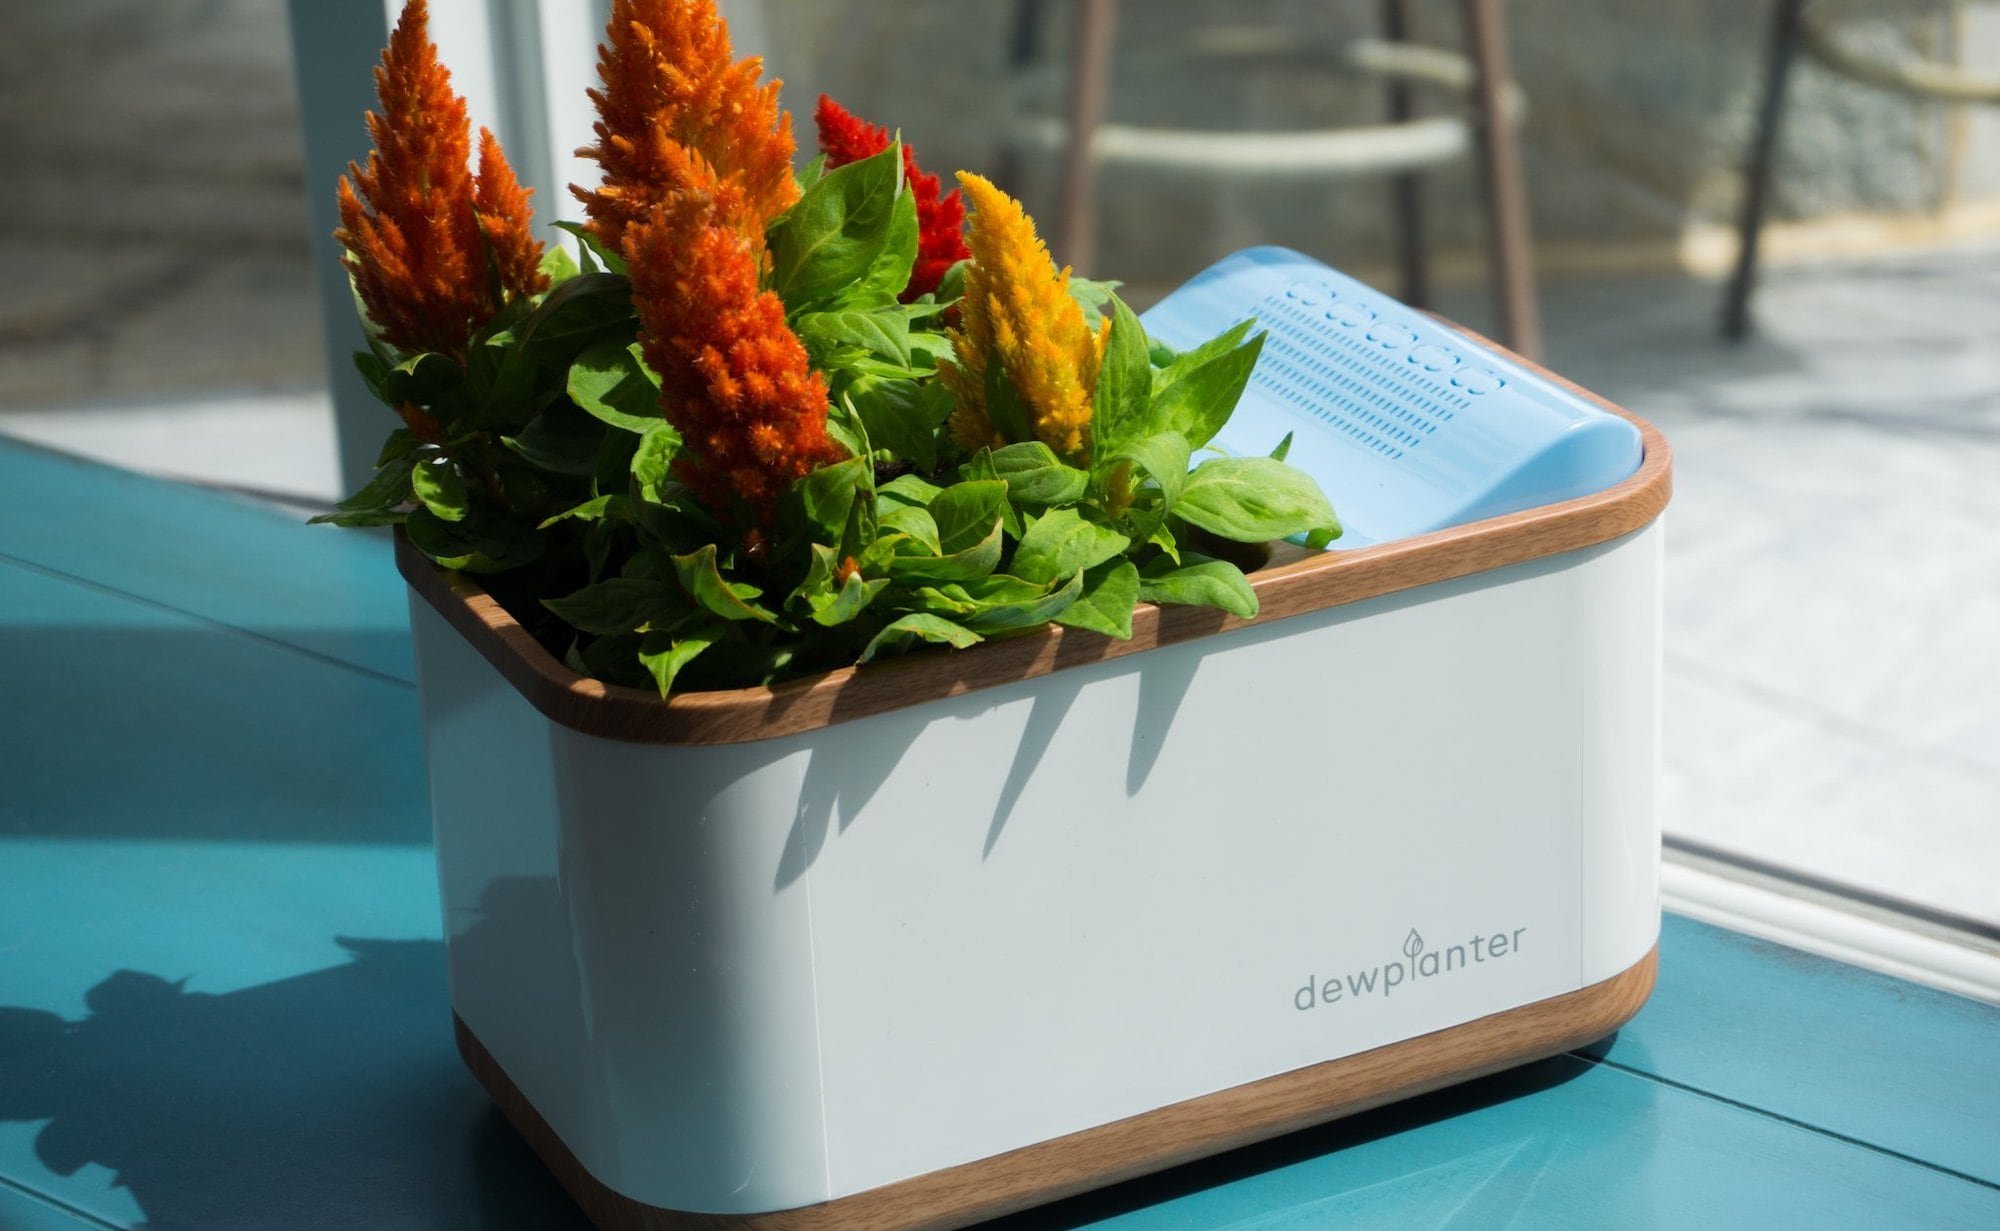 Dewplanter Water-Generating Planter uses condensation to hydrate your plants